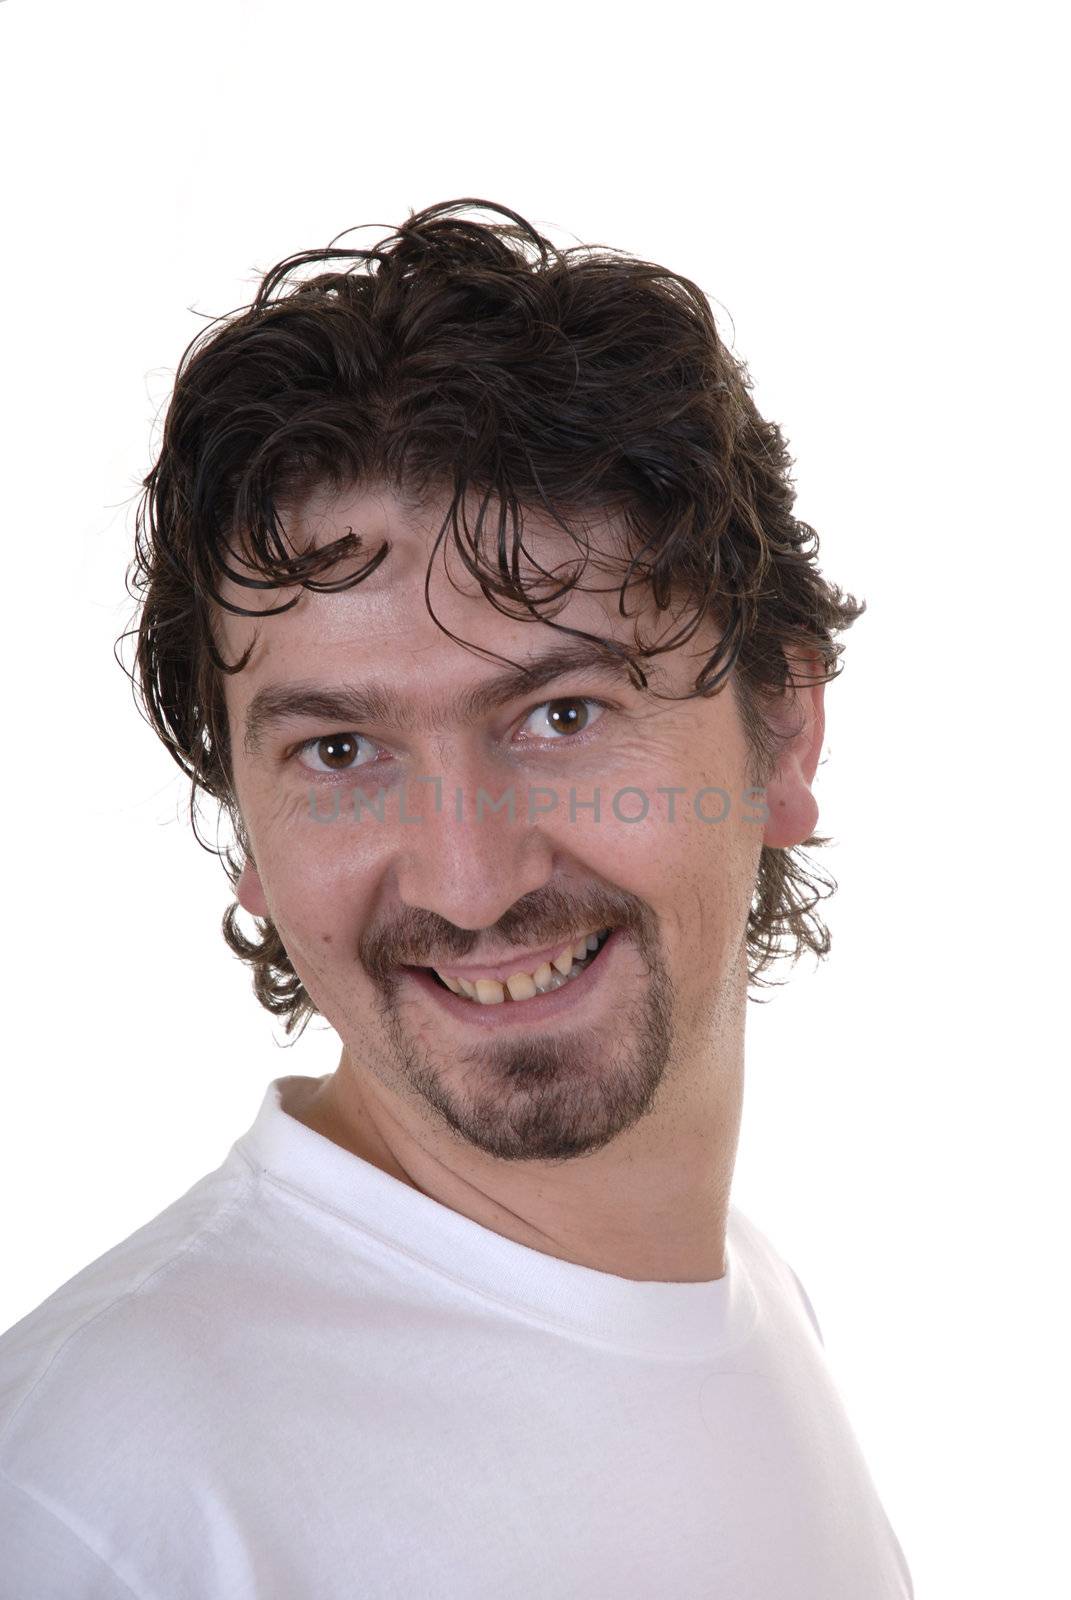 young man portrait in a white background